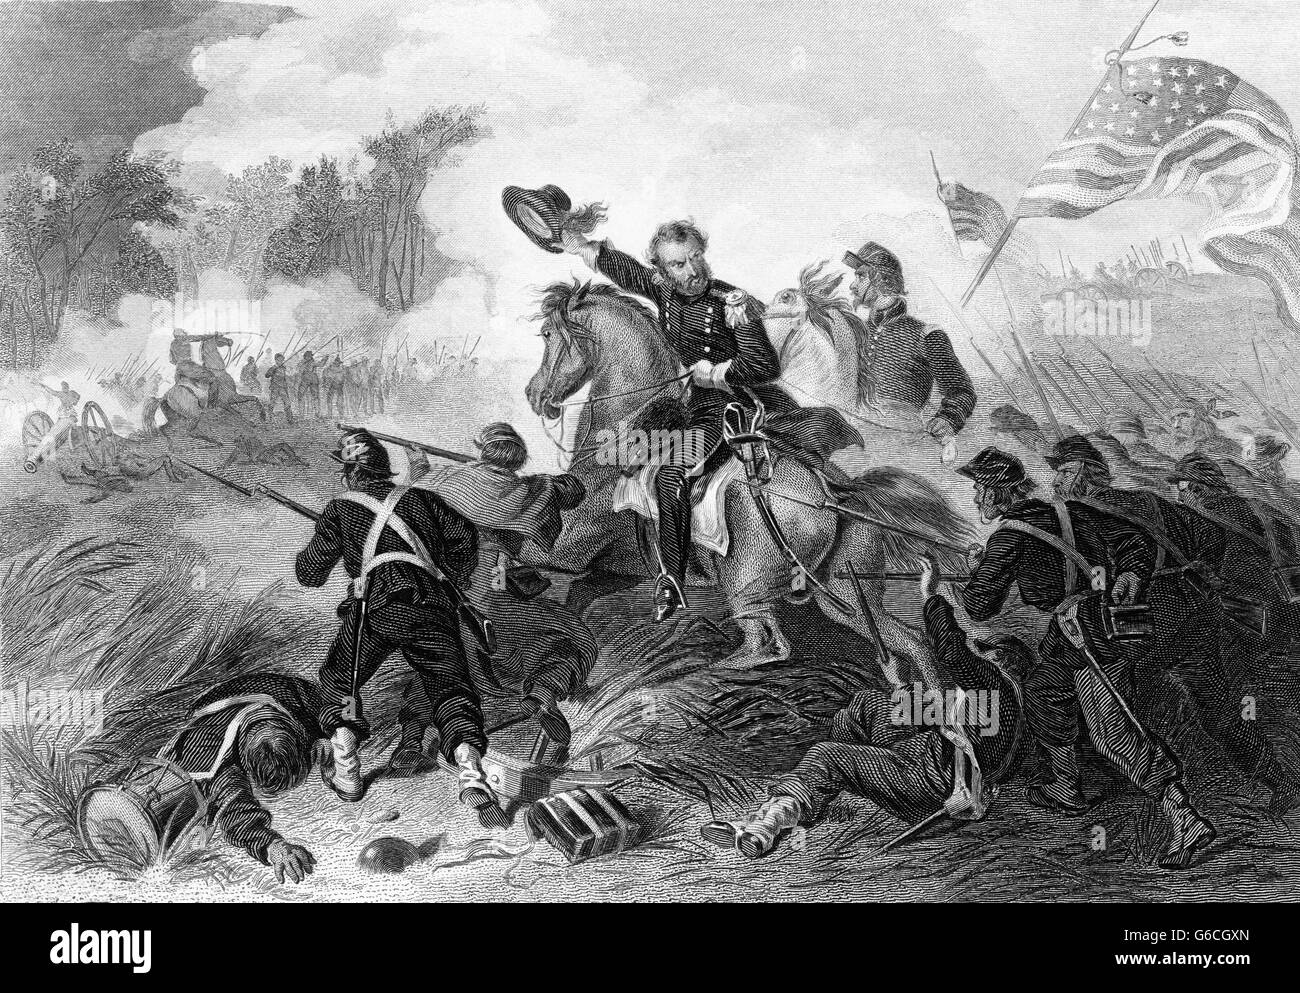 1860s AUGUST 1861 BATTLE OF WILSON'S CREEK AND THE DEATH GENERAL LYON NEAR SPRINGFIELD MISSOURI HERE DEPICTING LYON'S CHARGE Stock Photo